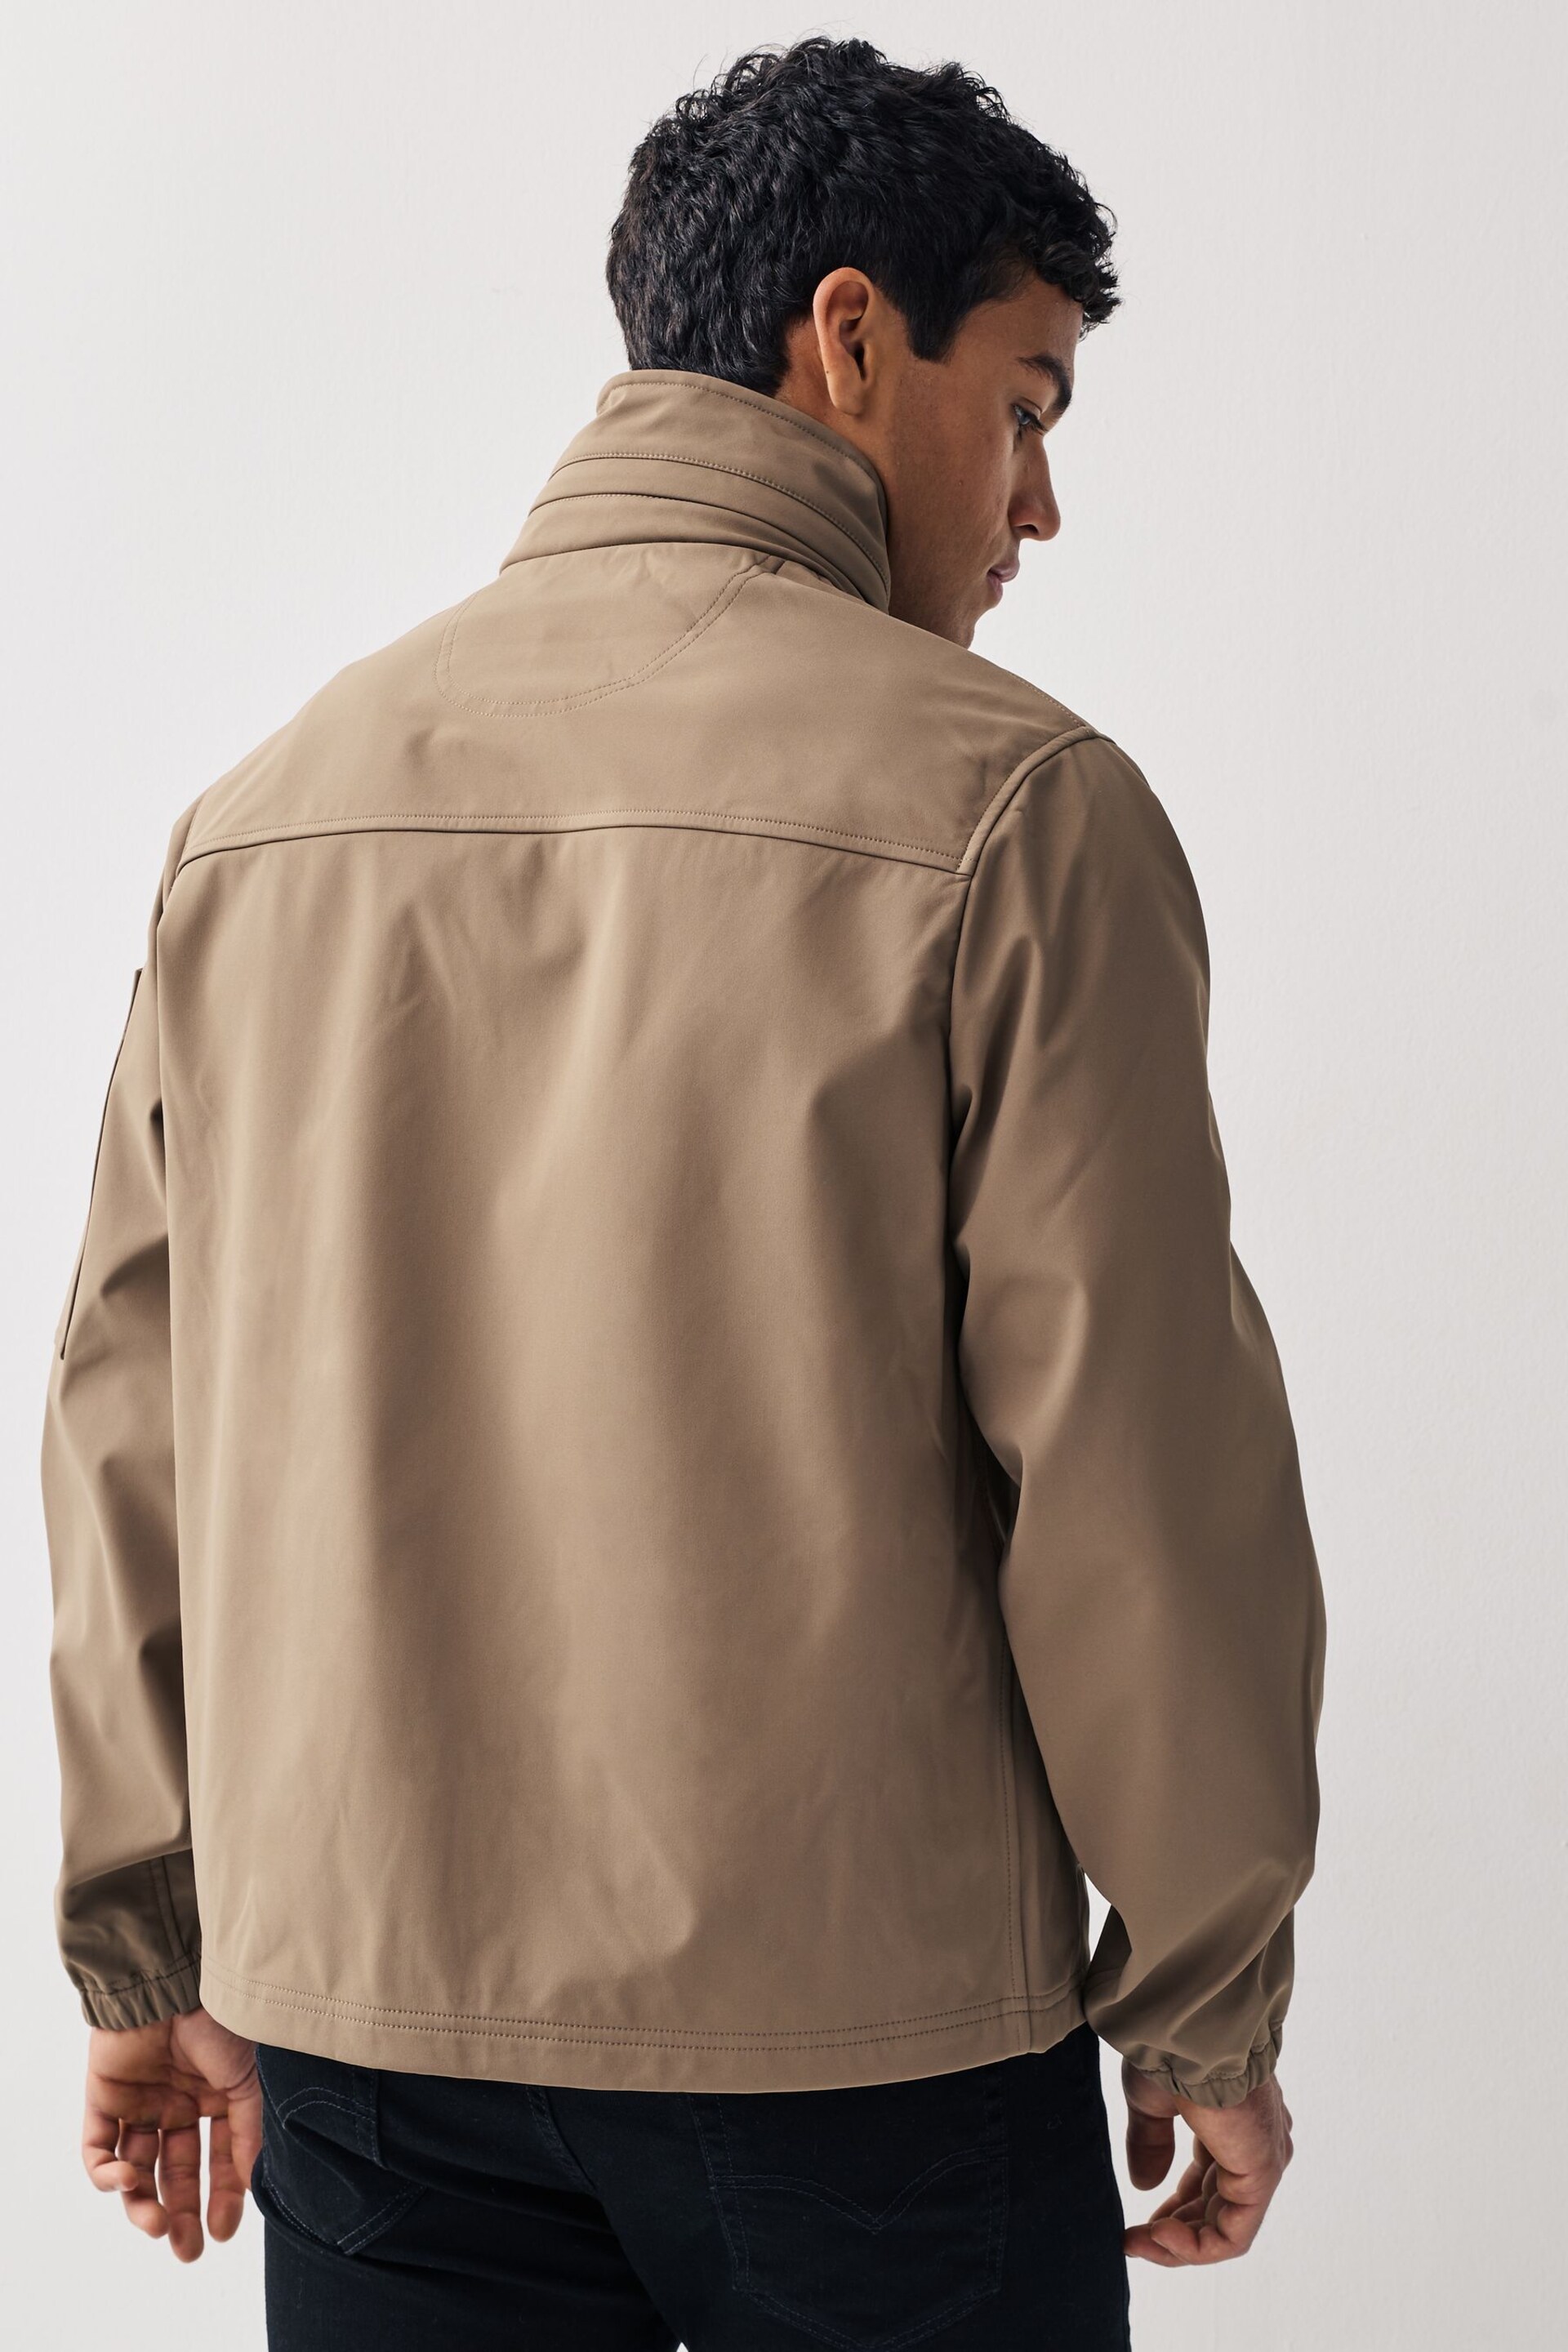 GANT Soft Shell Water Repellent Jacket - Image 2 of 8